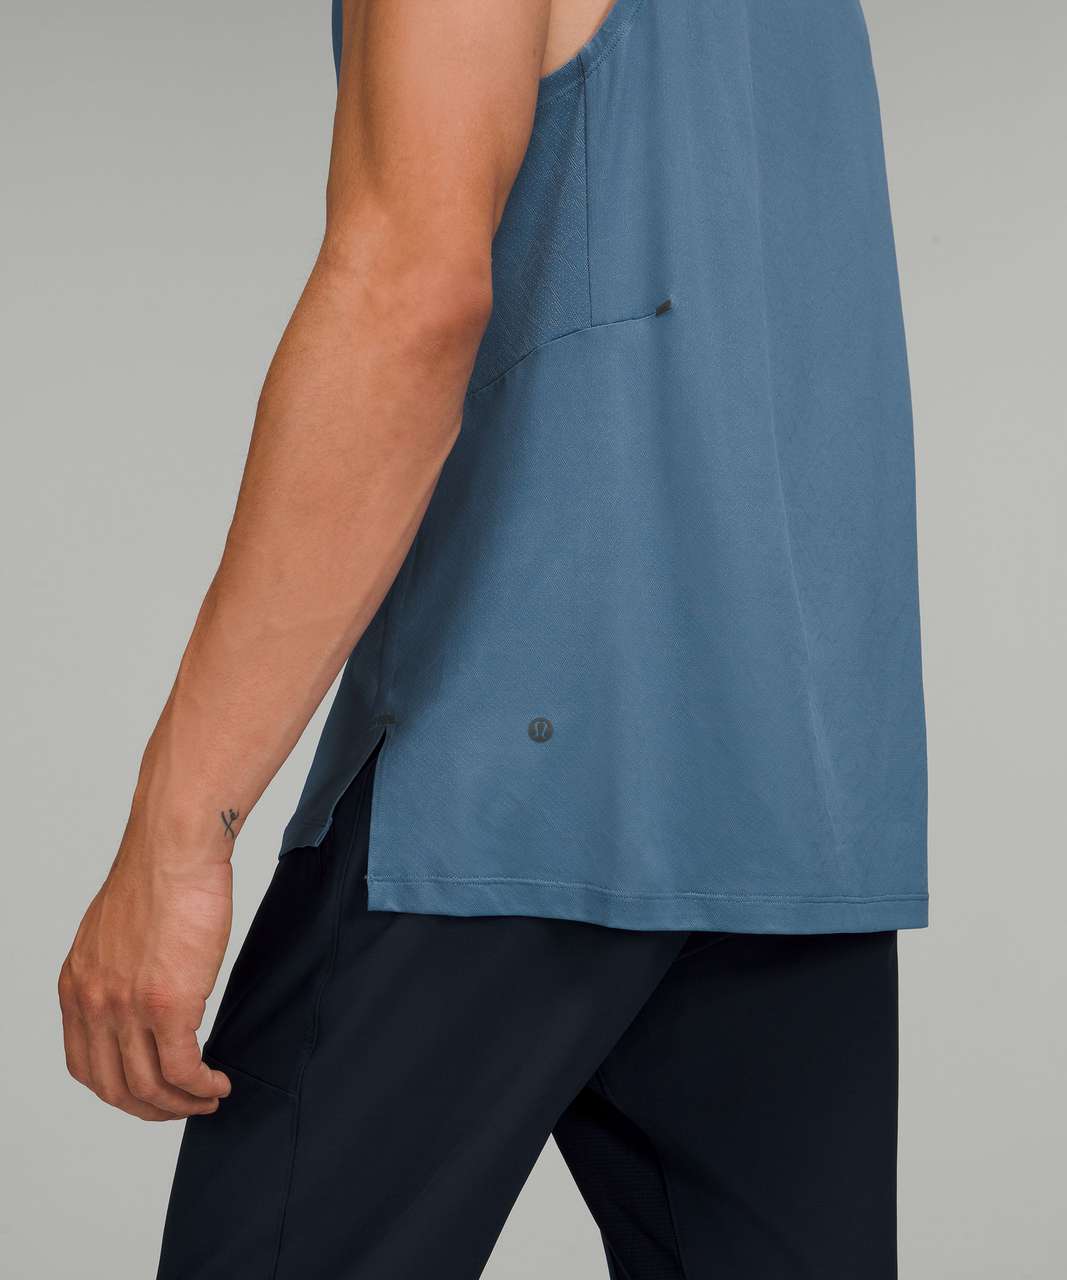 Soft Surroundings Timely Blue Chambray Flowy Sleeveless Tank Top